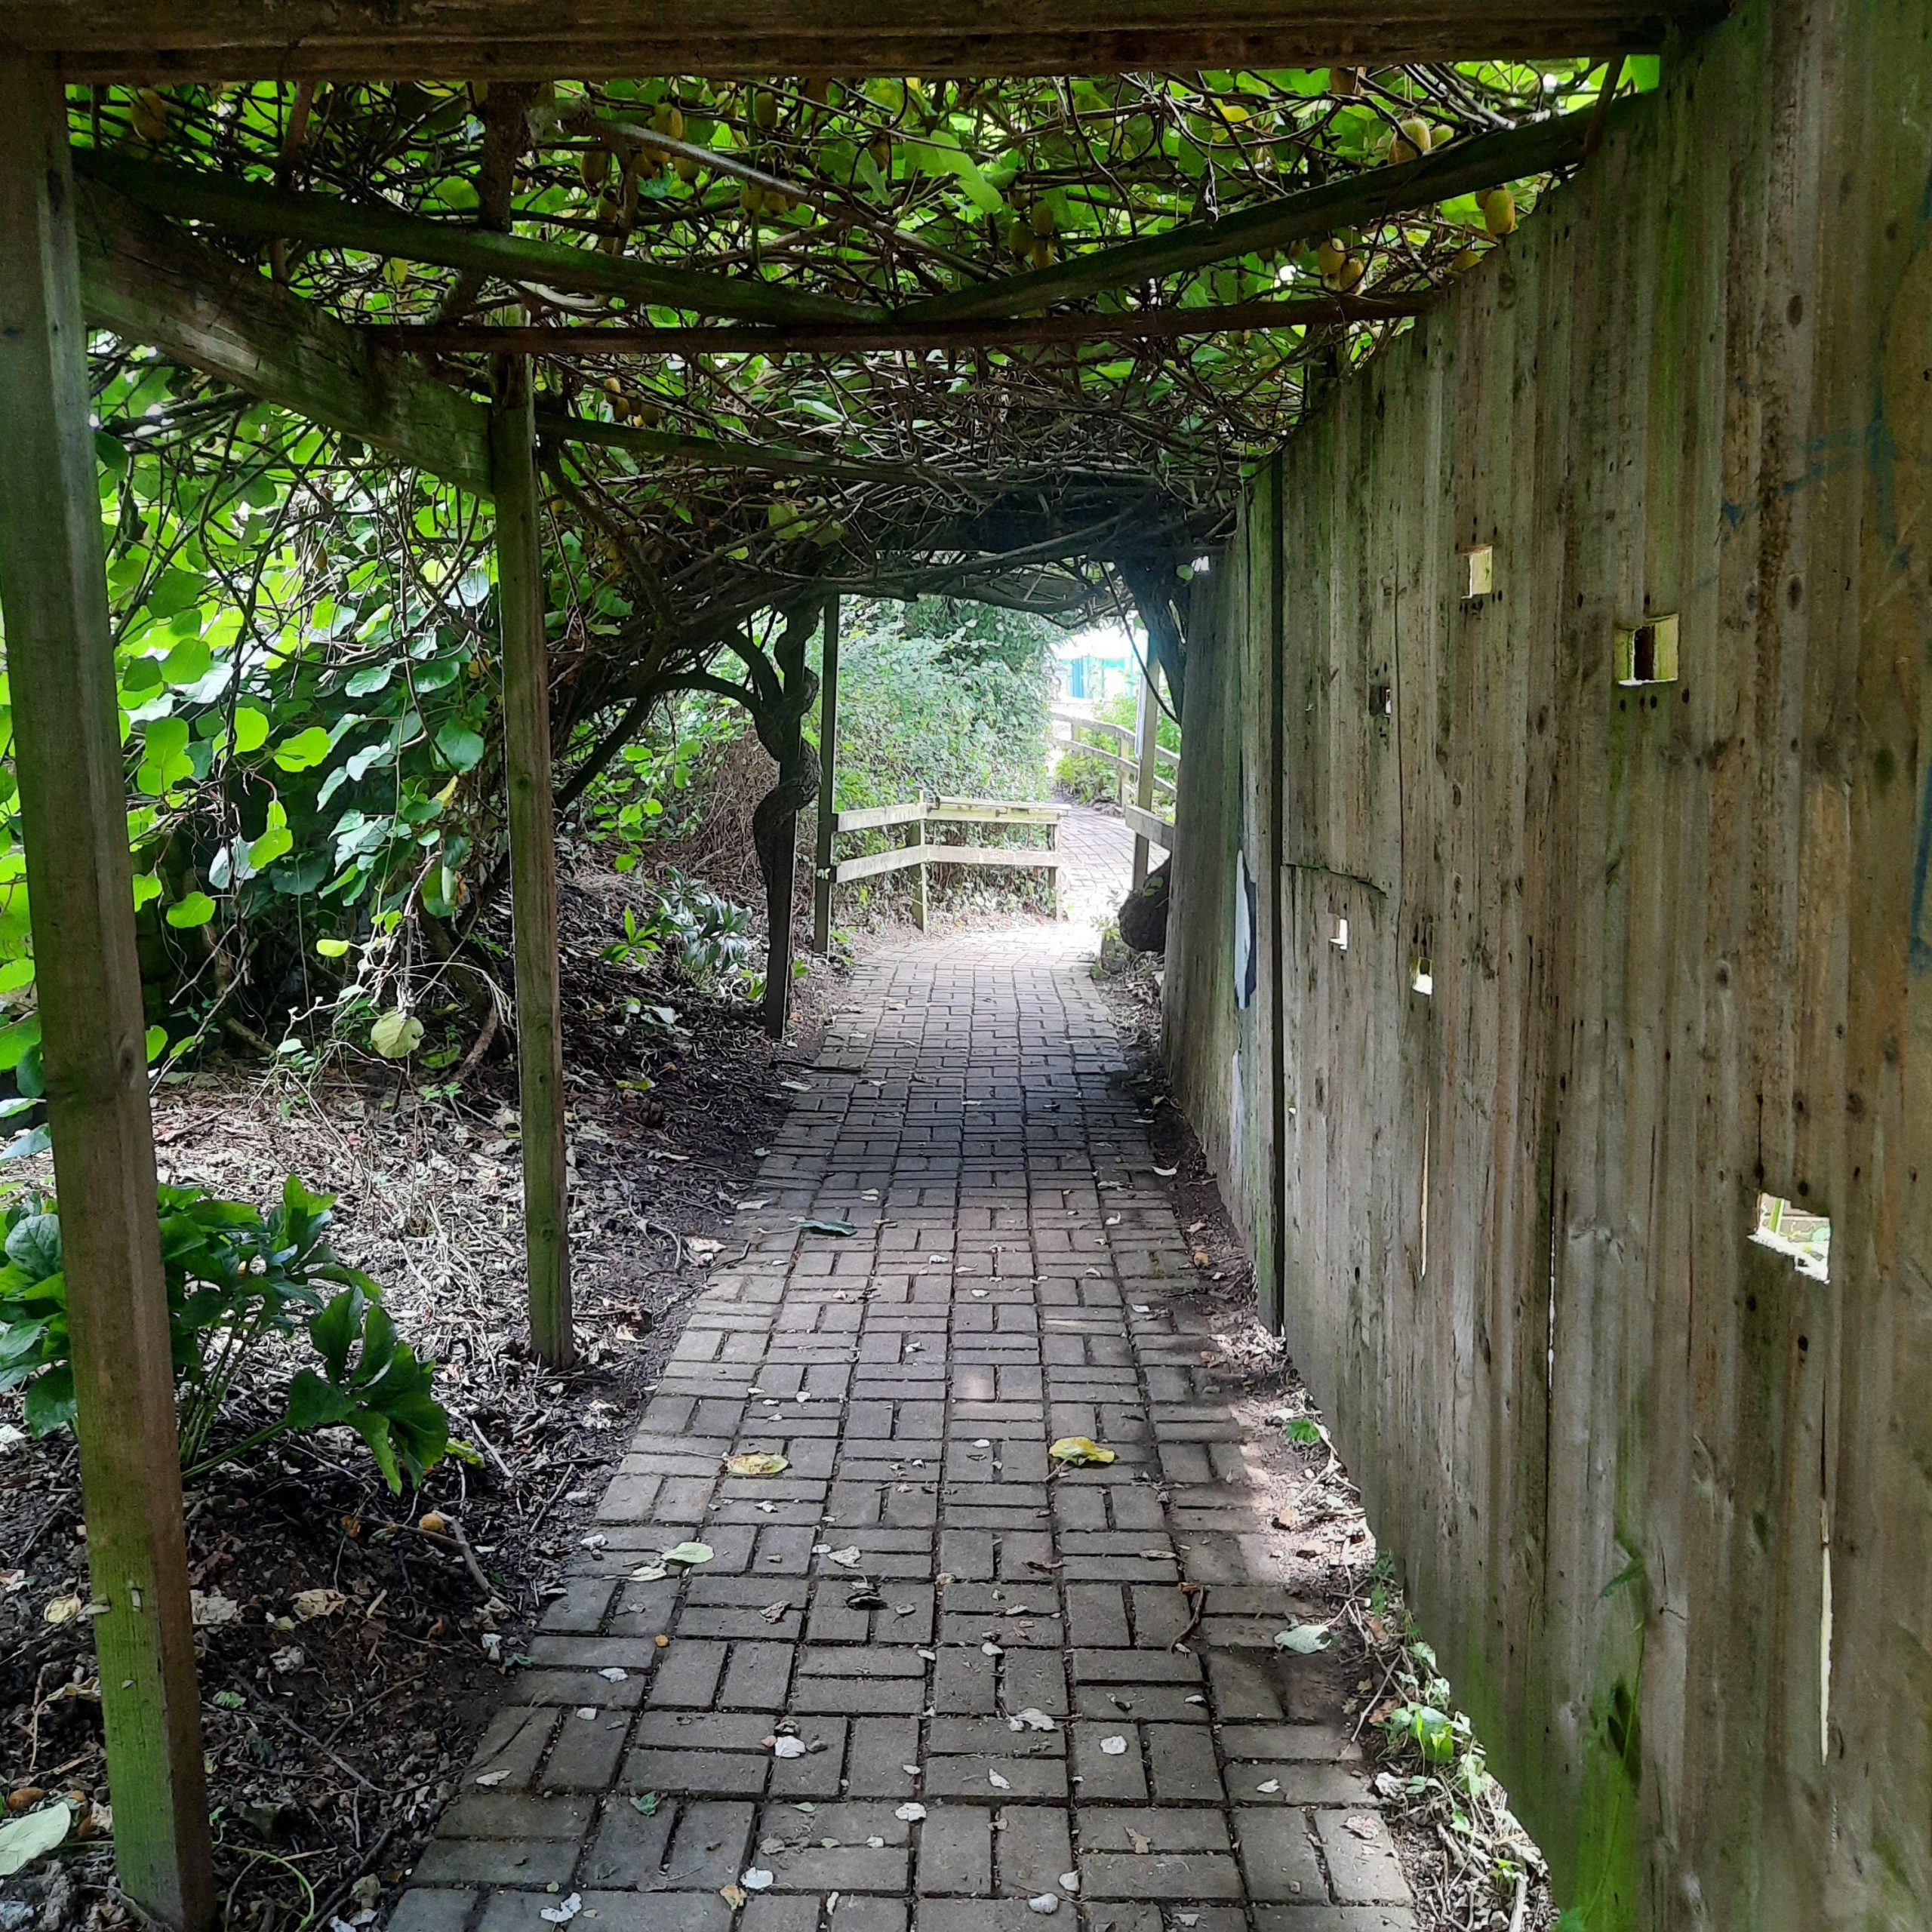 Image of a path at Meanwood Urban Farm showing some unevenness and low height